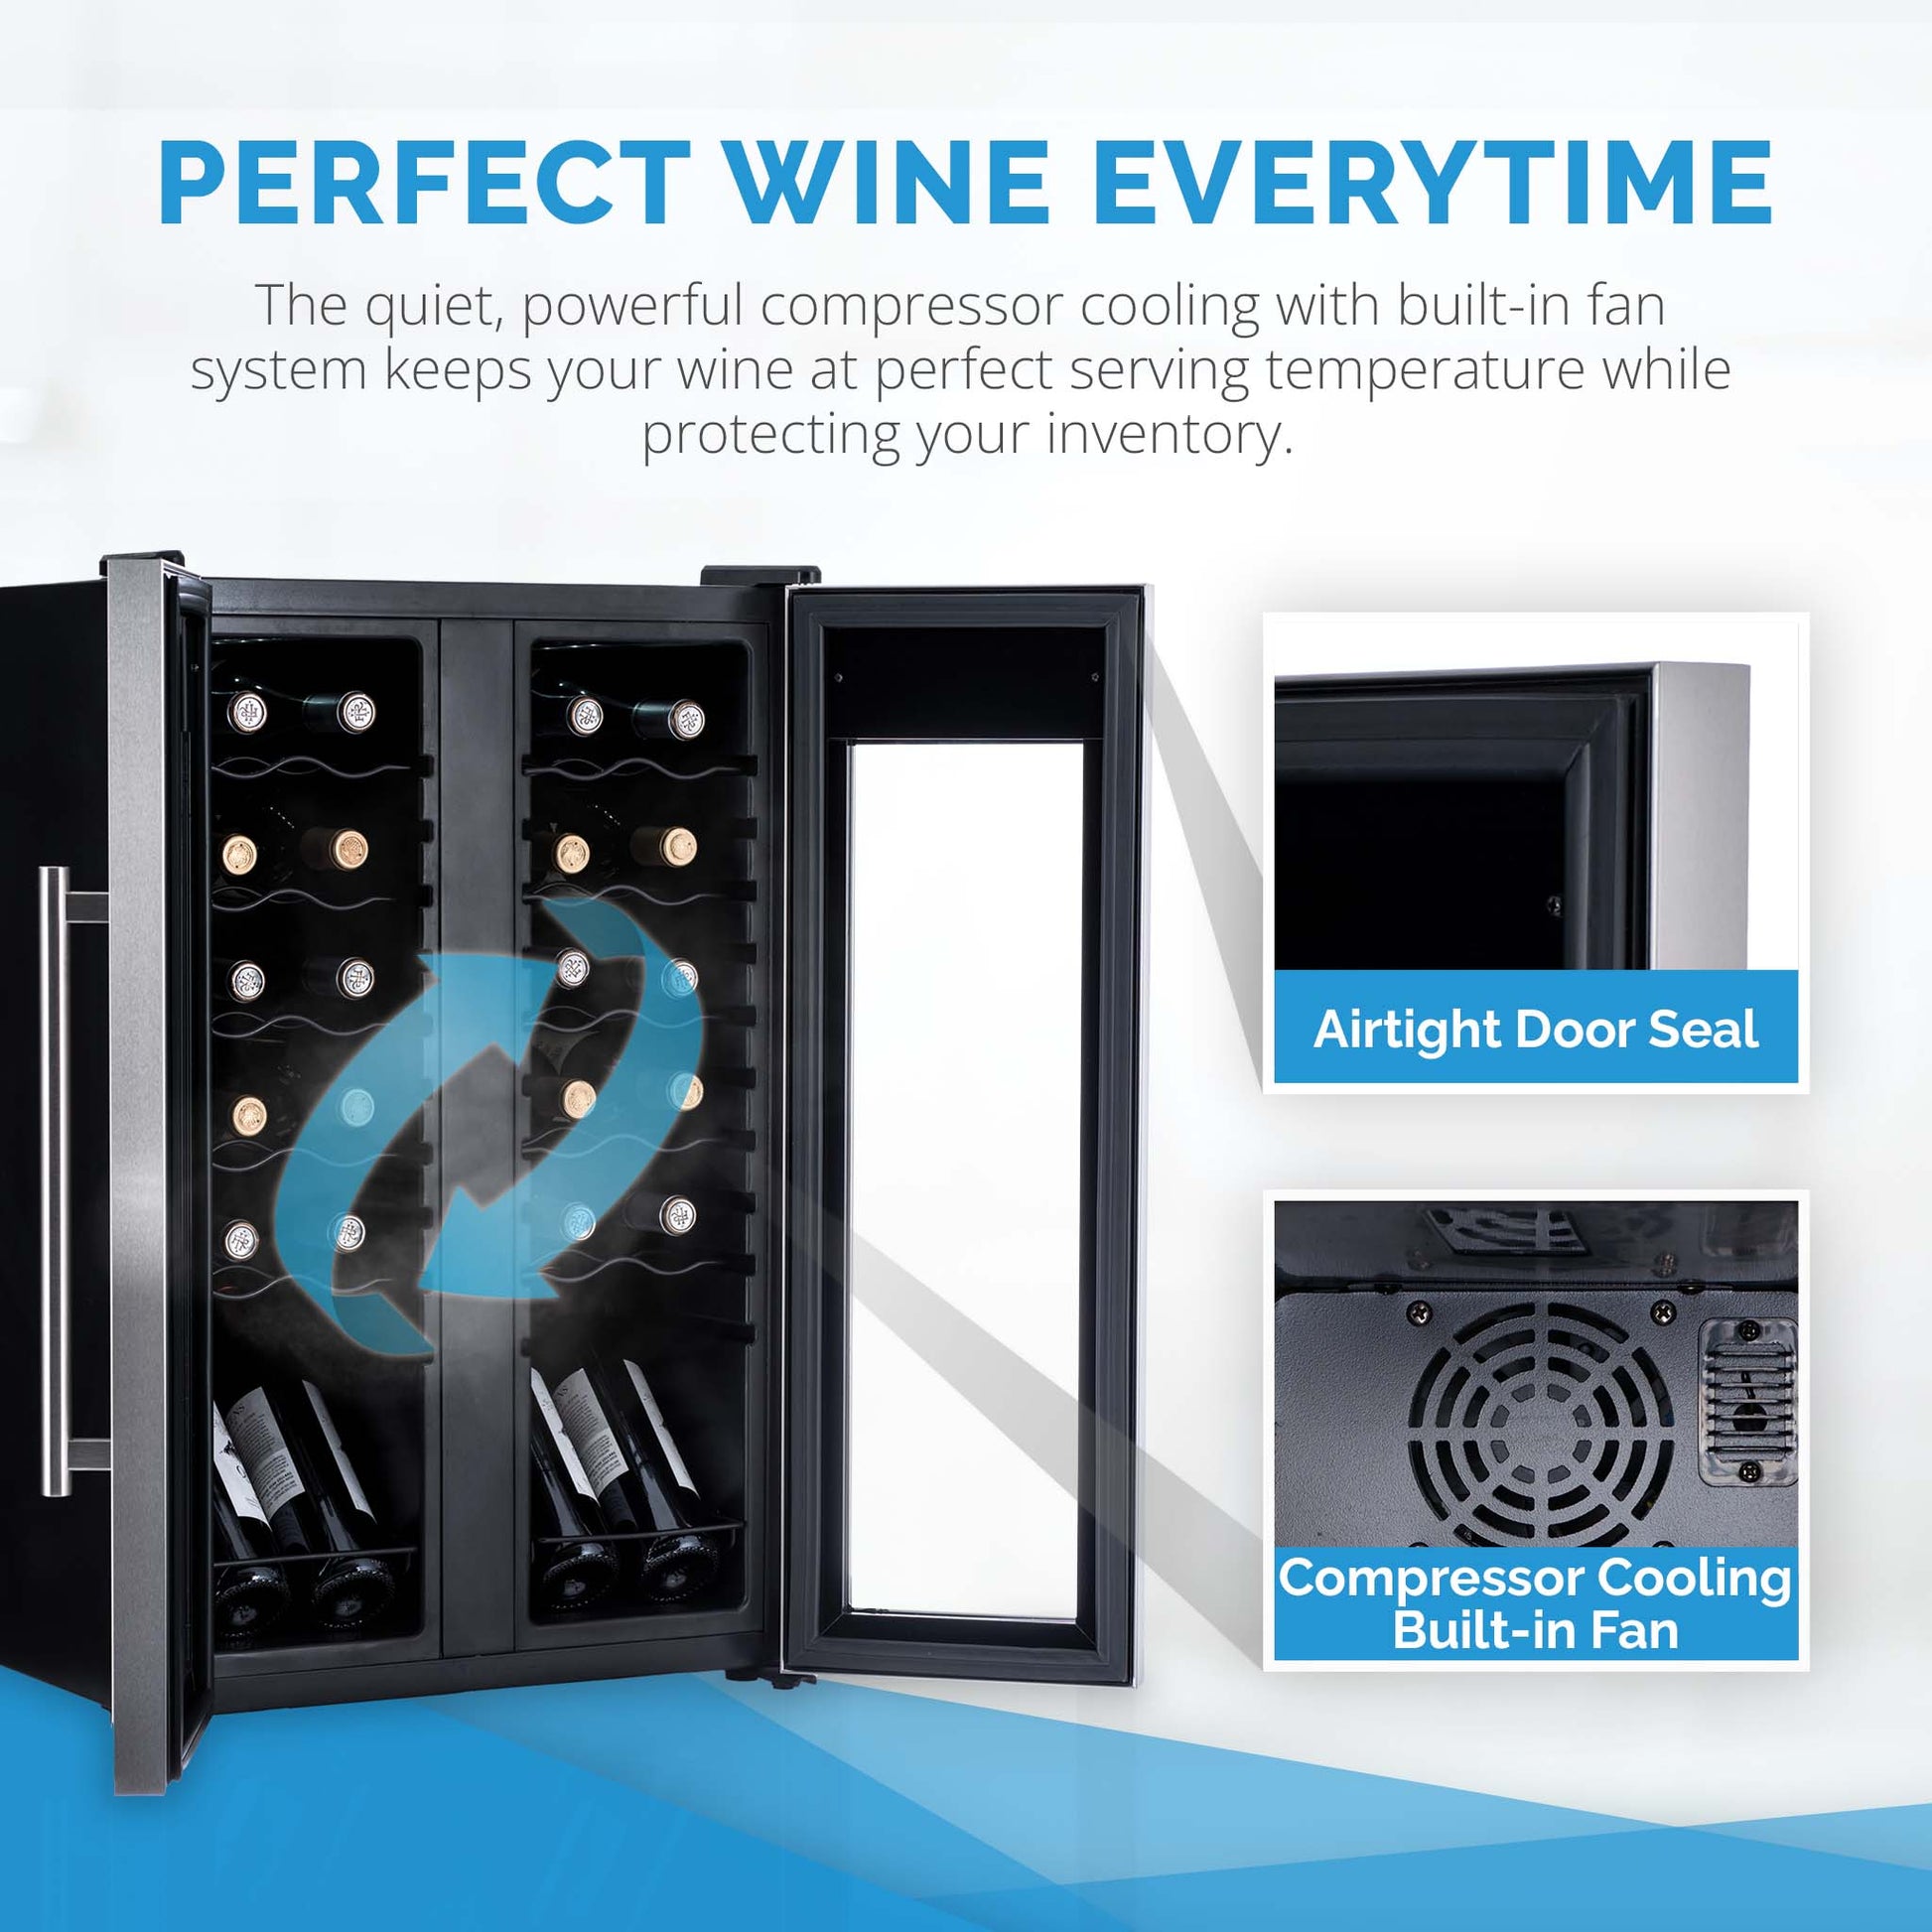 Newair 24?Bottle Wine Cooler Refrigerator, French Door Dual Temperature Zones, Freestanding Wine Fridge with Stainless Steel & Double-Layer Tempered Glass Door, Quiet Compressor Cooling for Reds, Whites, and Sparkling Wine